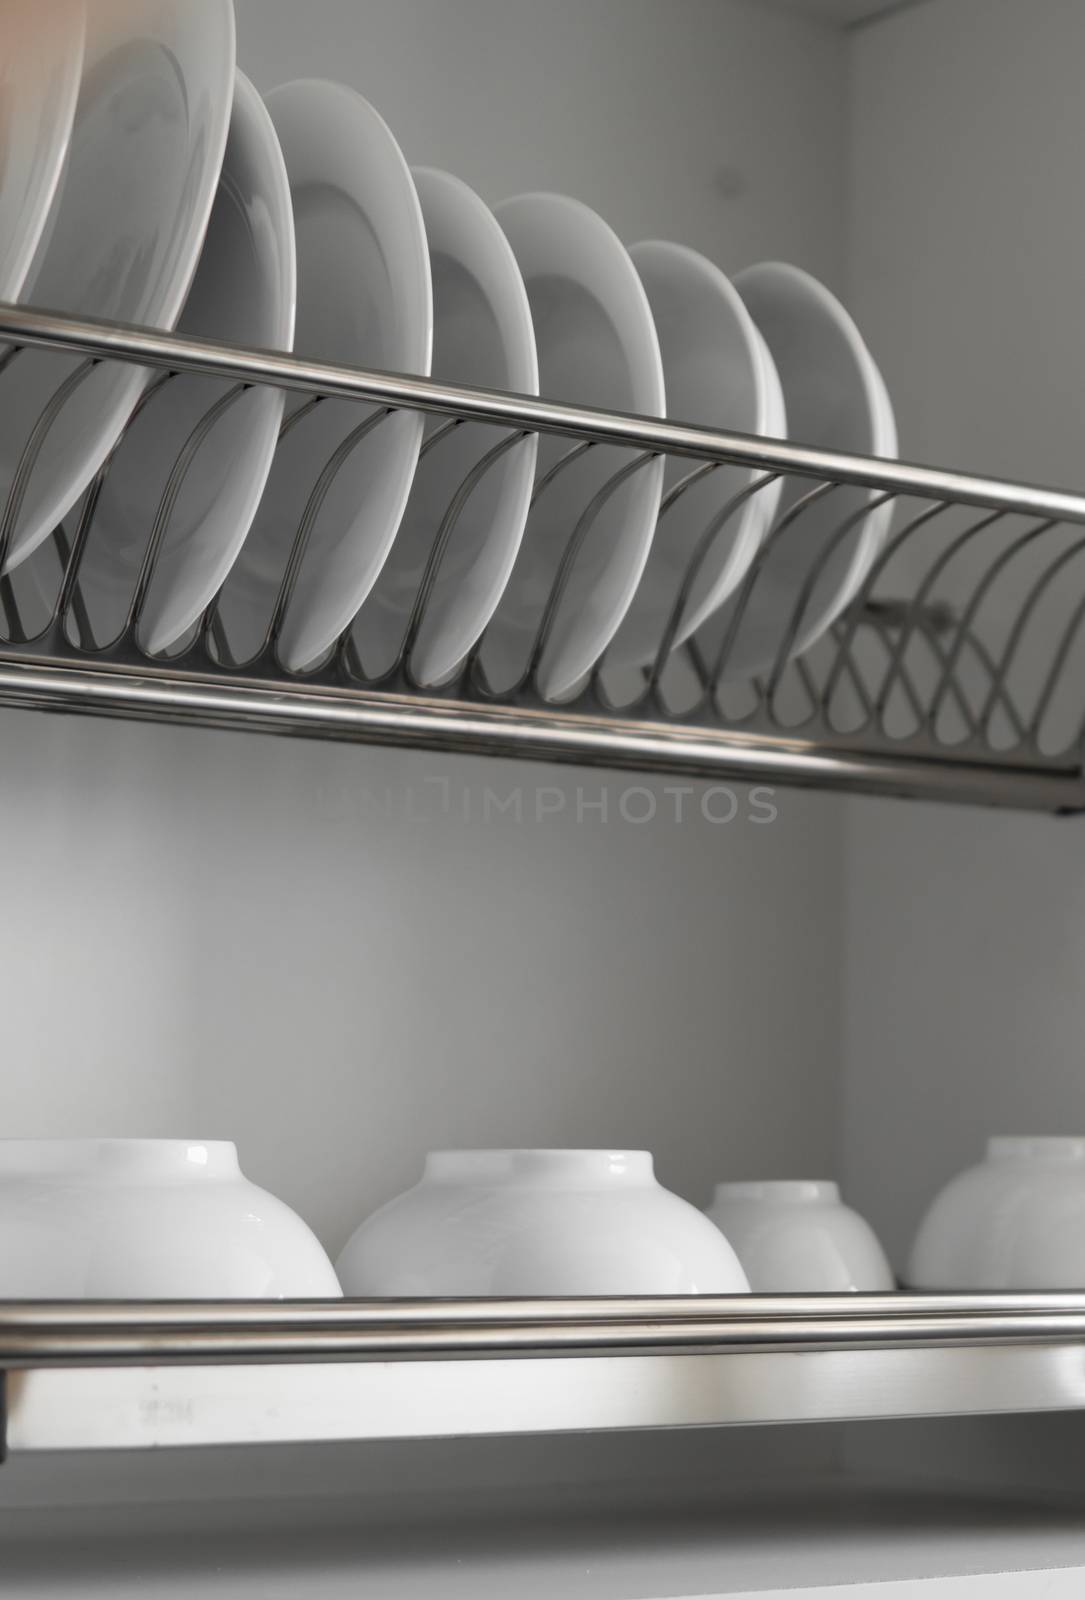 Dish drying metal rack with big nice white clean plates. Traditional comfortable kitchen. Open white dish draining closet with wet dishes of glass and ceramic, plates, bowls drying inside on rack